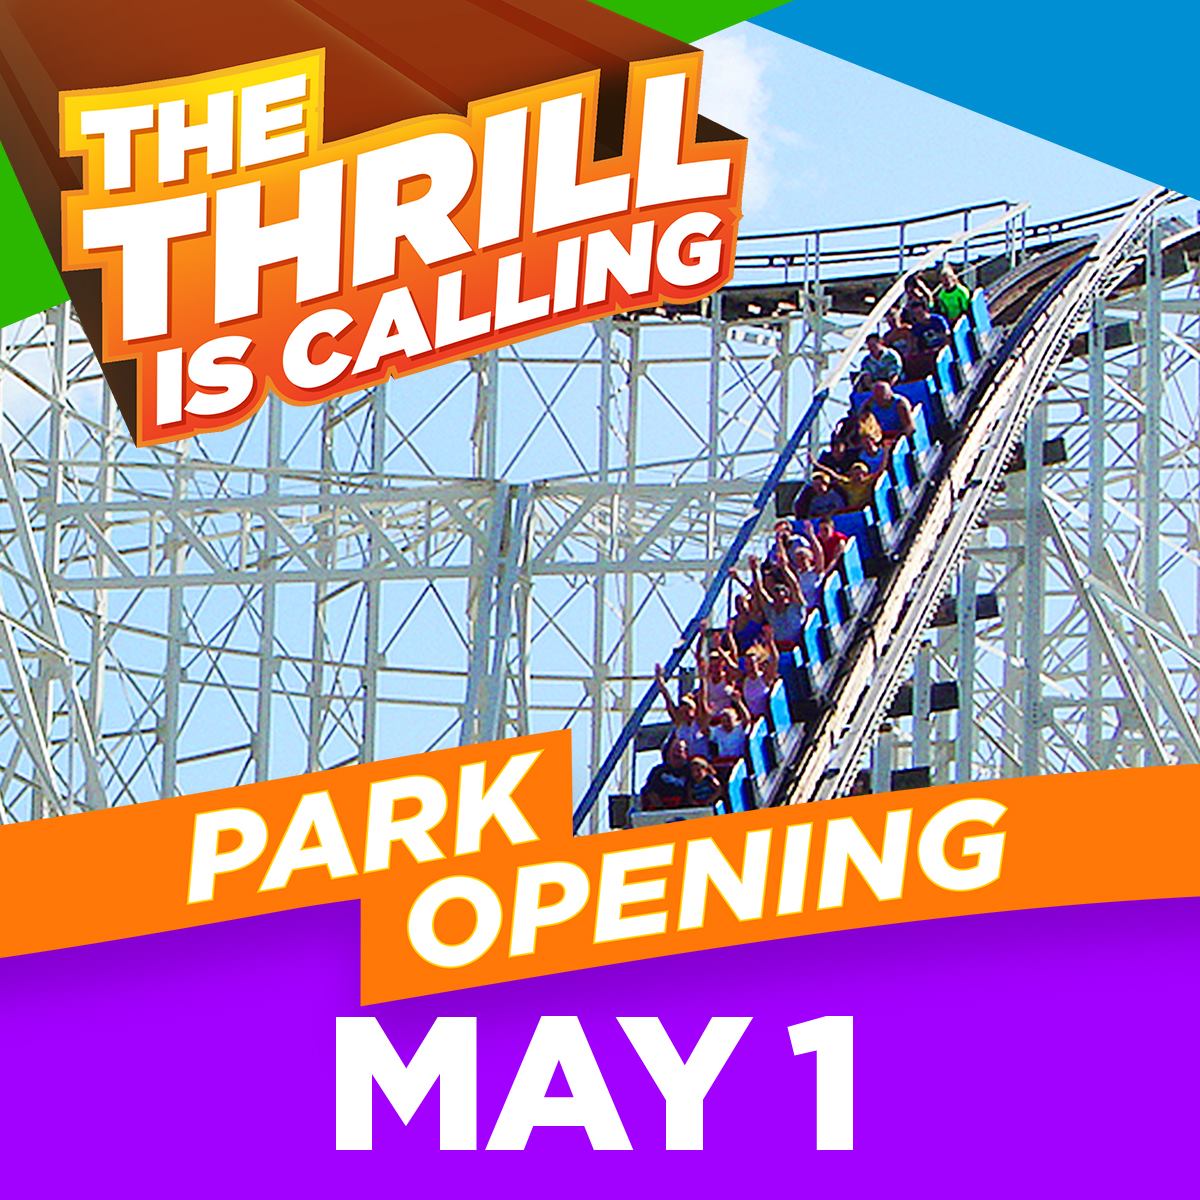 The Great Escape & Hurricane Harbor to Open May 1 with Safety